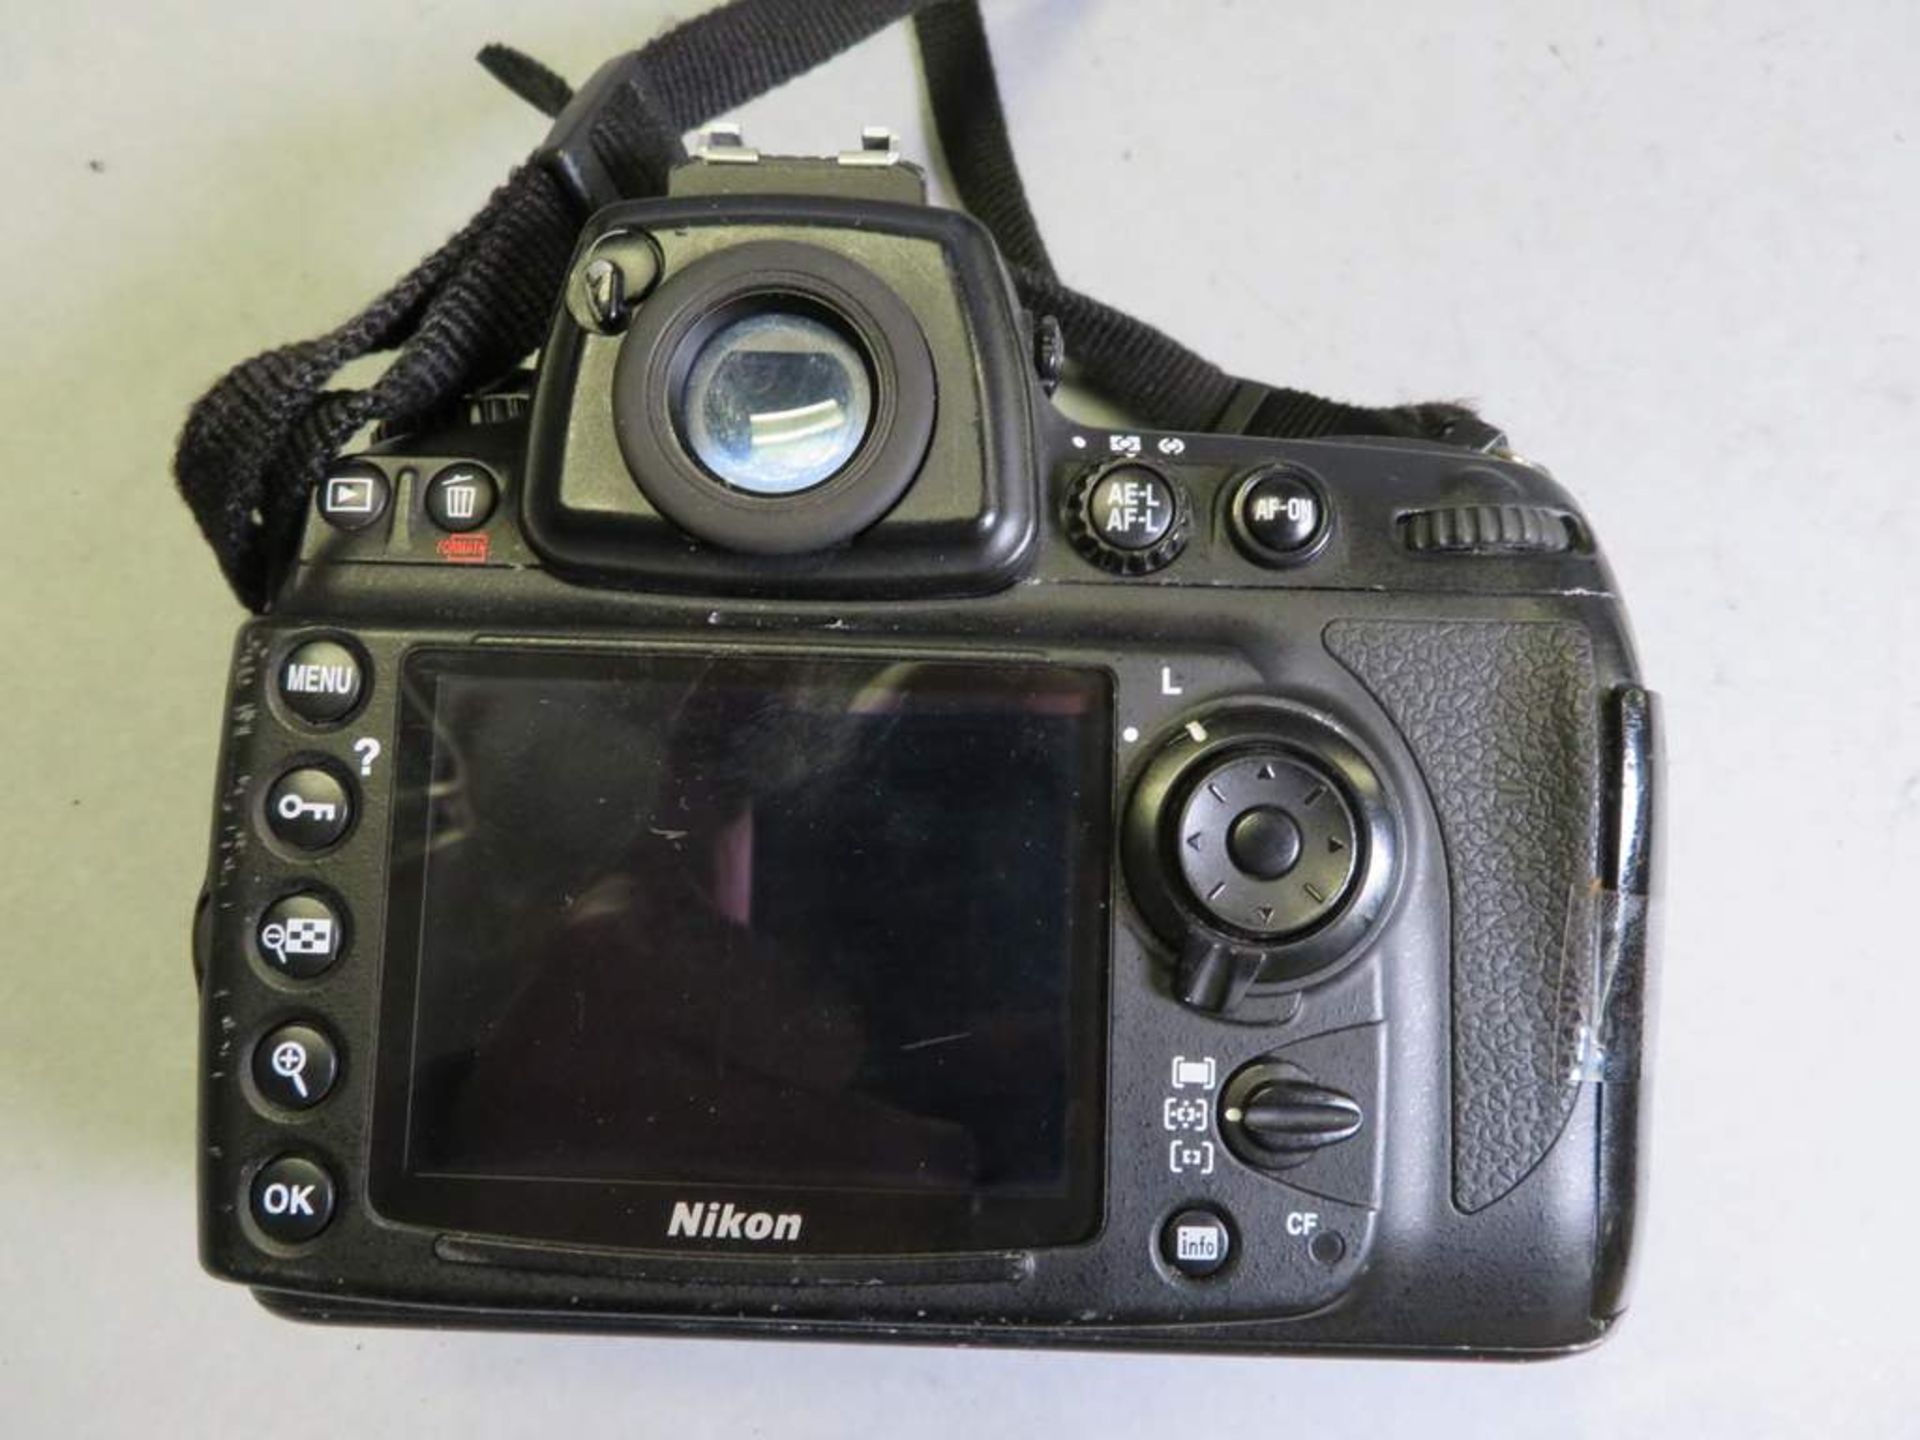 Nikon D700 Camera body - no battery or accessories - Image 5 of 6